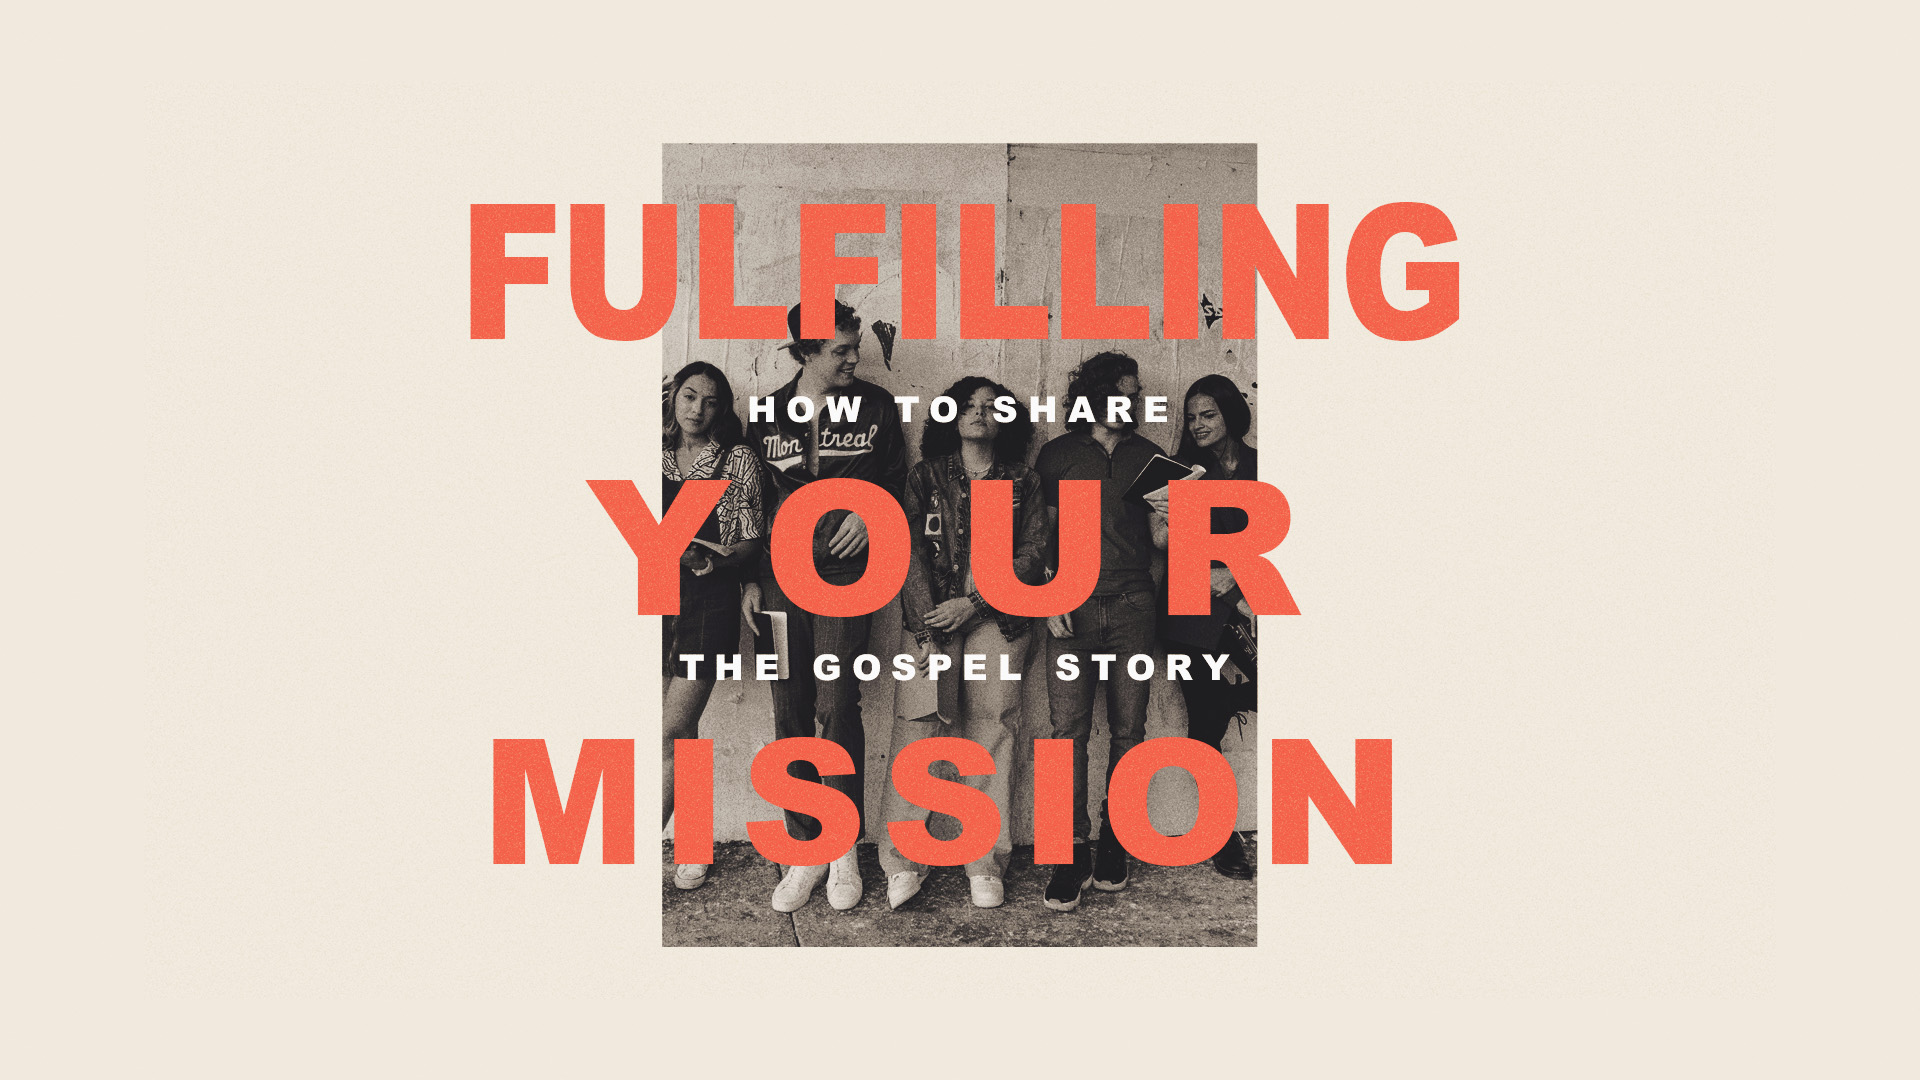 Fulfilling Your Mission: How To Share The Gospel Story

Saturdays | 5:00-6:30pm
February 4 - 25
